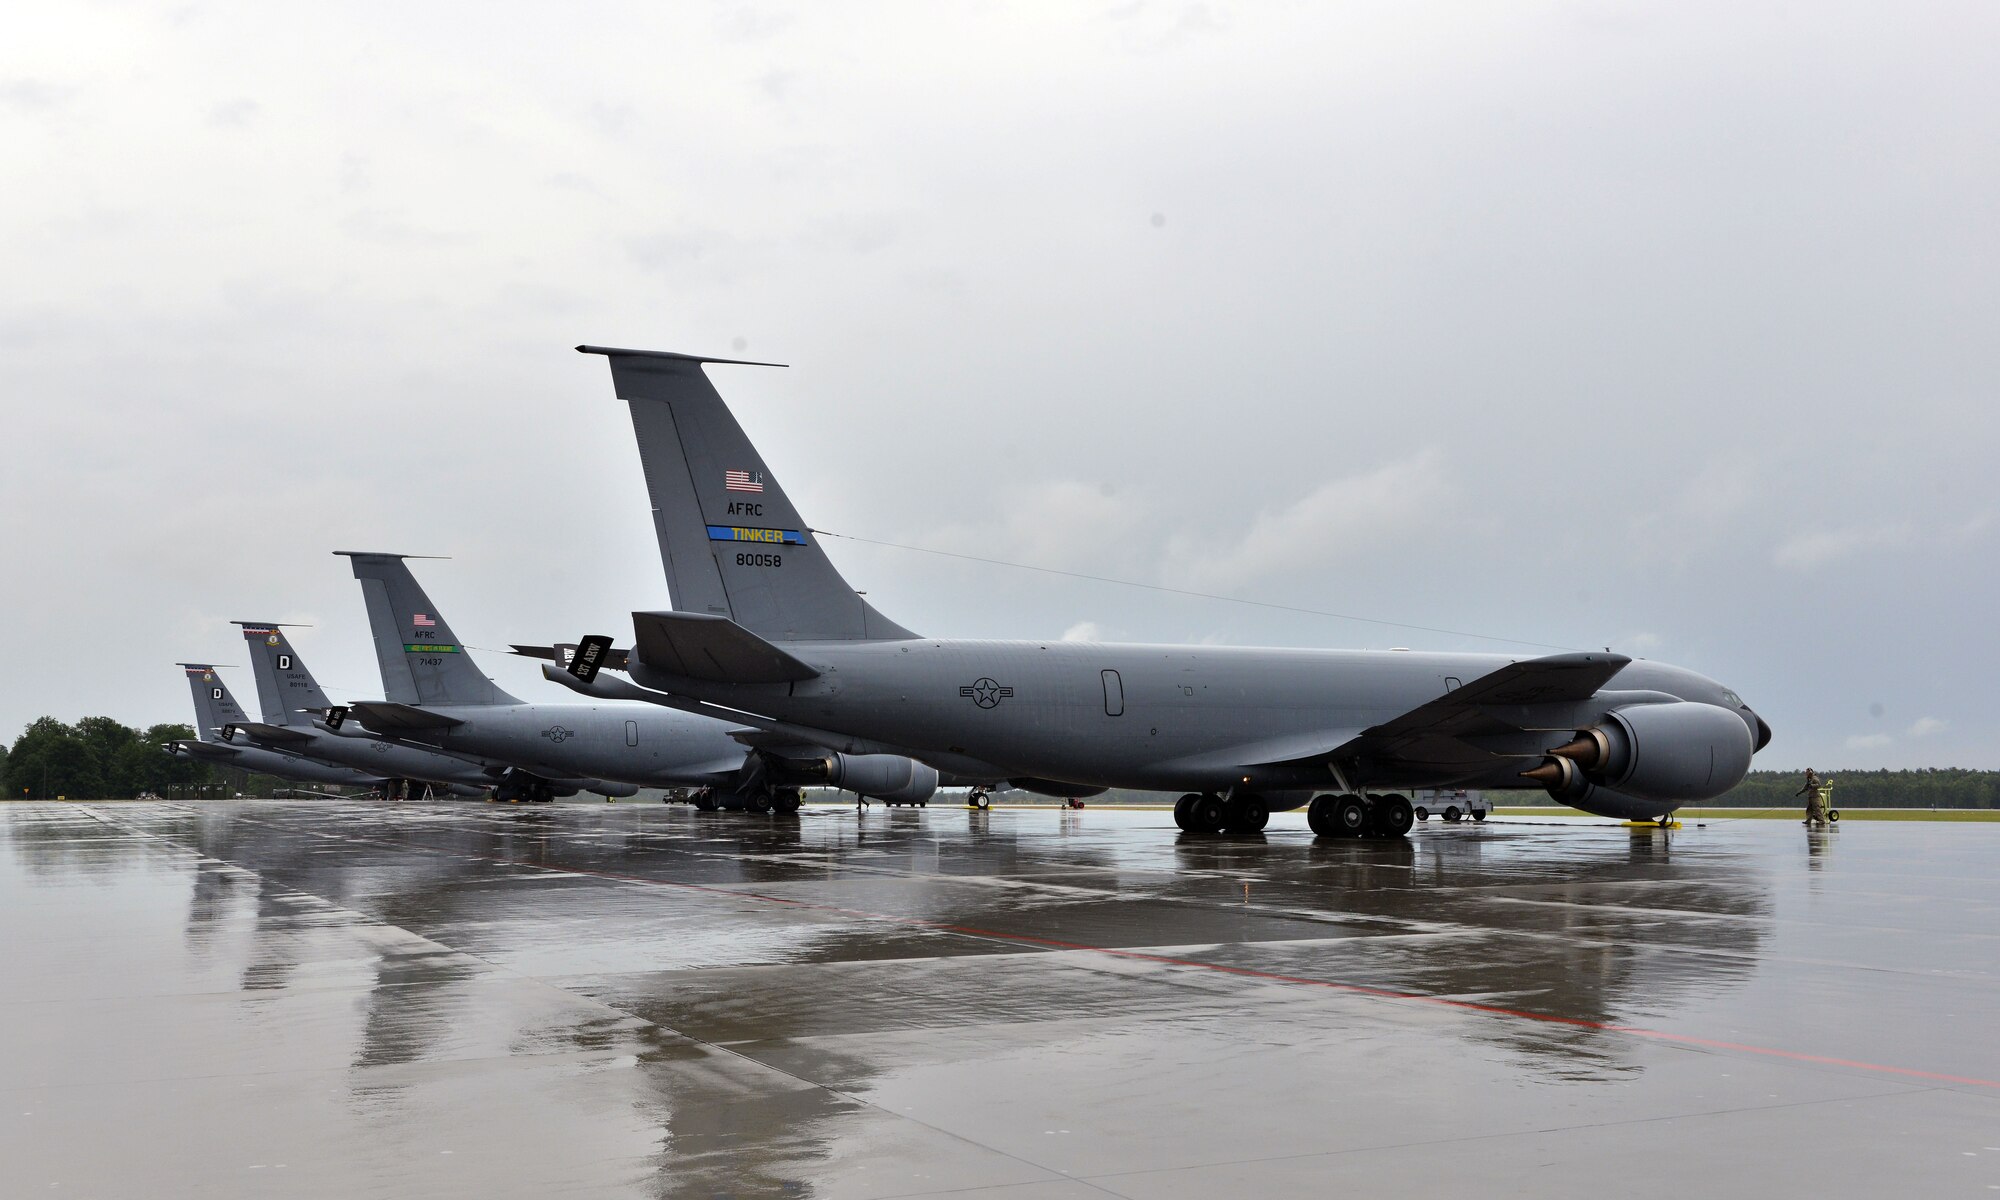 Four KC-135 Stratotankers await a mission on the flightline in support of Baltic Operations 2015, June 9, 2015, at Powidz Air Base, Poland. As part of BALTOPS 2015, the U.S. Air Force  deployed three KC-135 units to Poland: the 100th, 916th and 507th air refueling wings. (U.S. Air Force photo by Senior Airman Michael Battles)